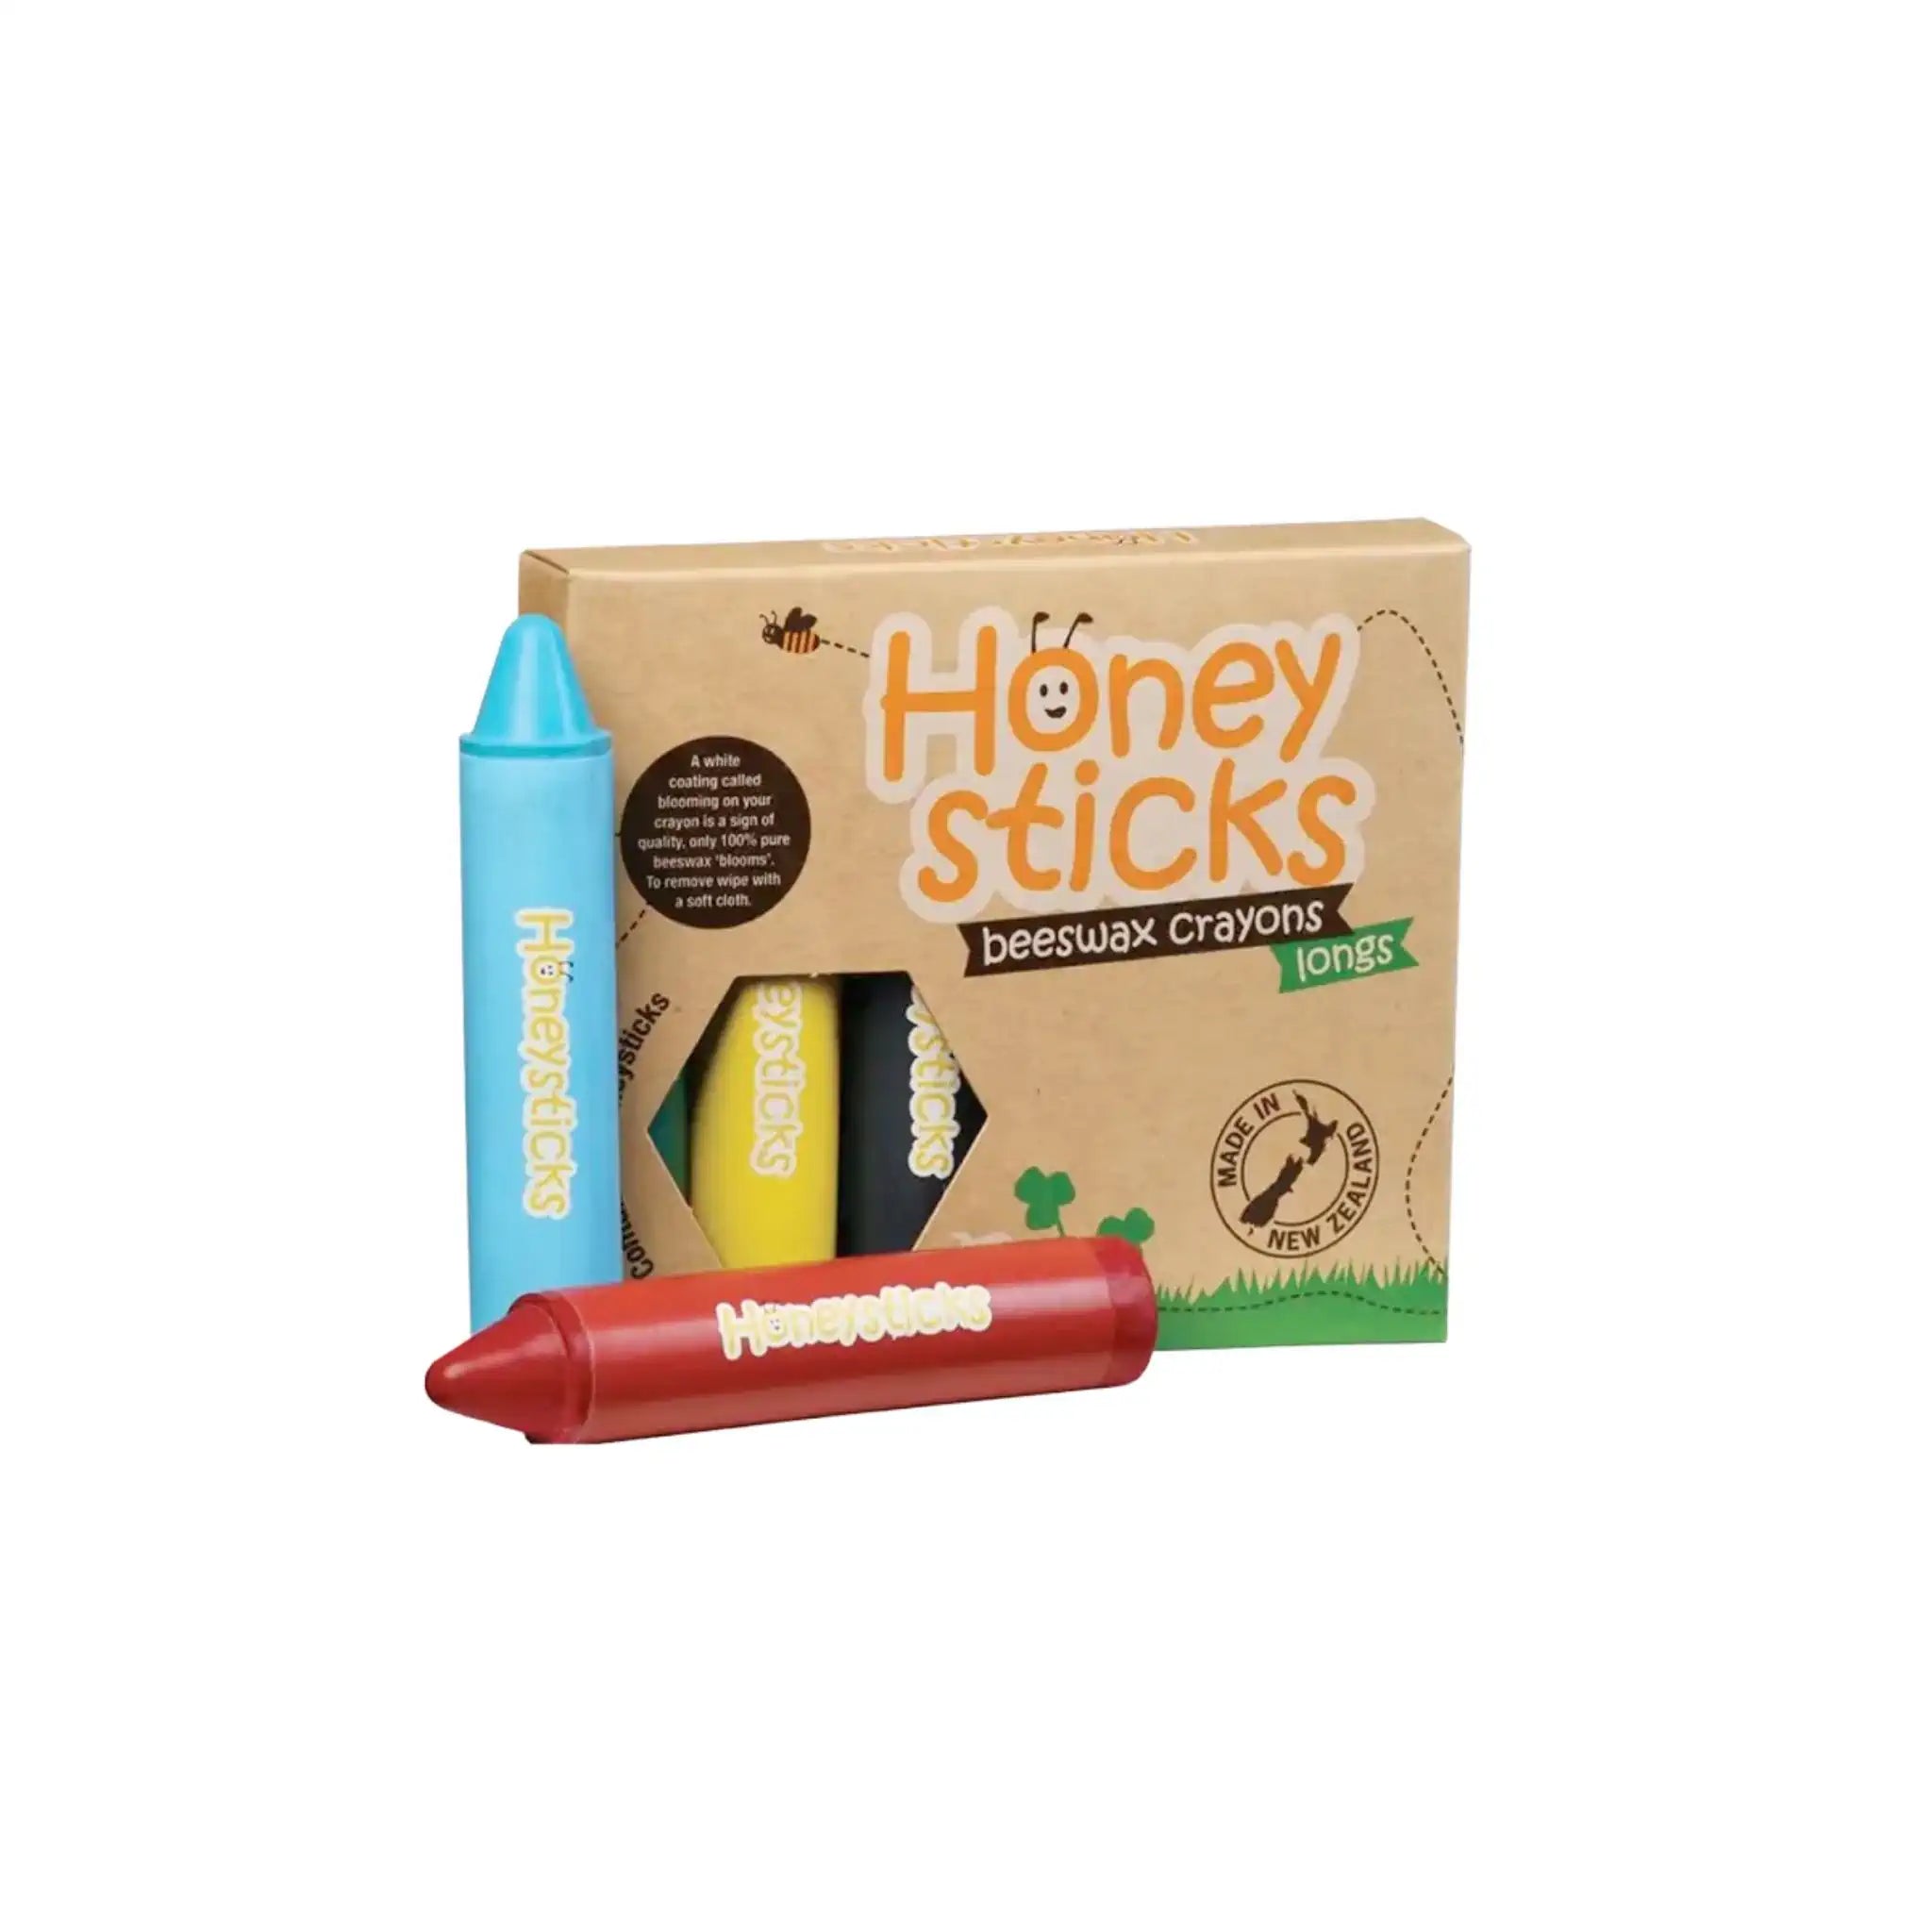 Honeysticks 100% Pure Beeswax Crayons (12 Pack) - Non Toxic